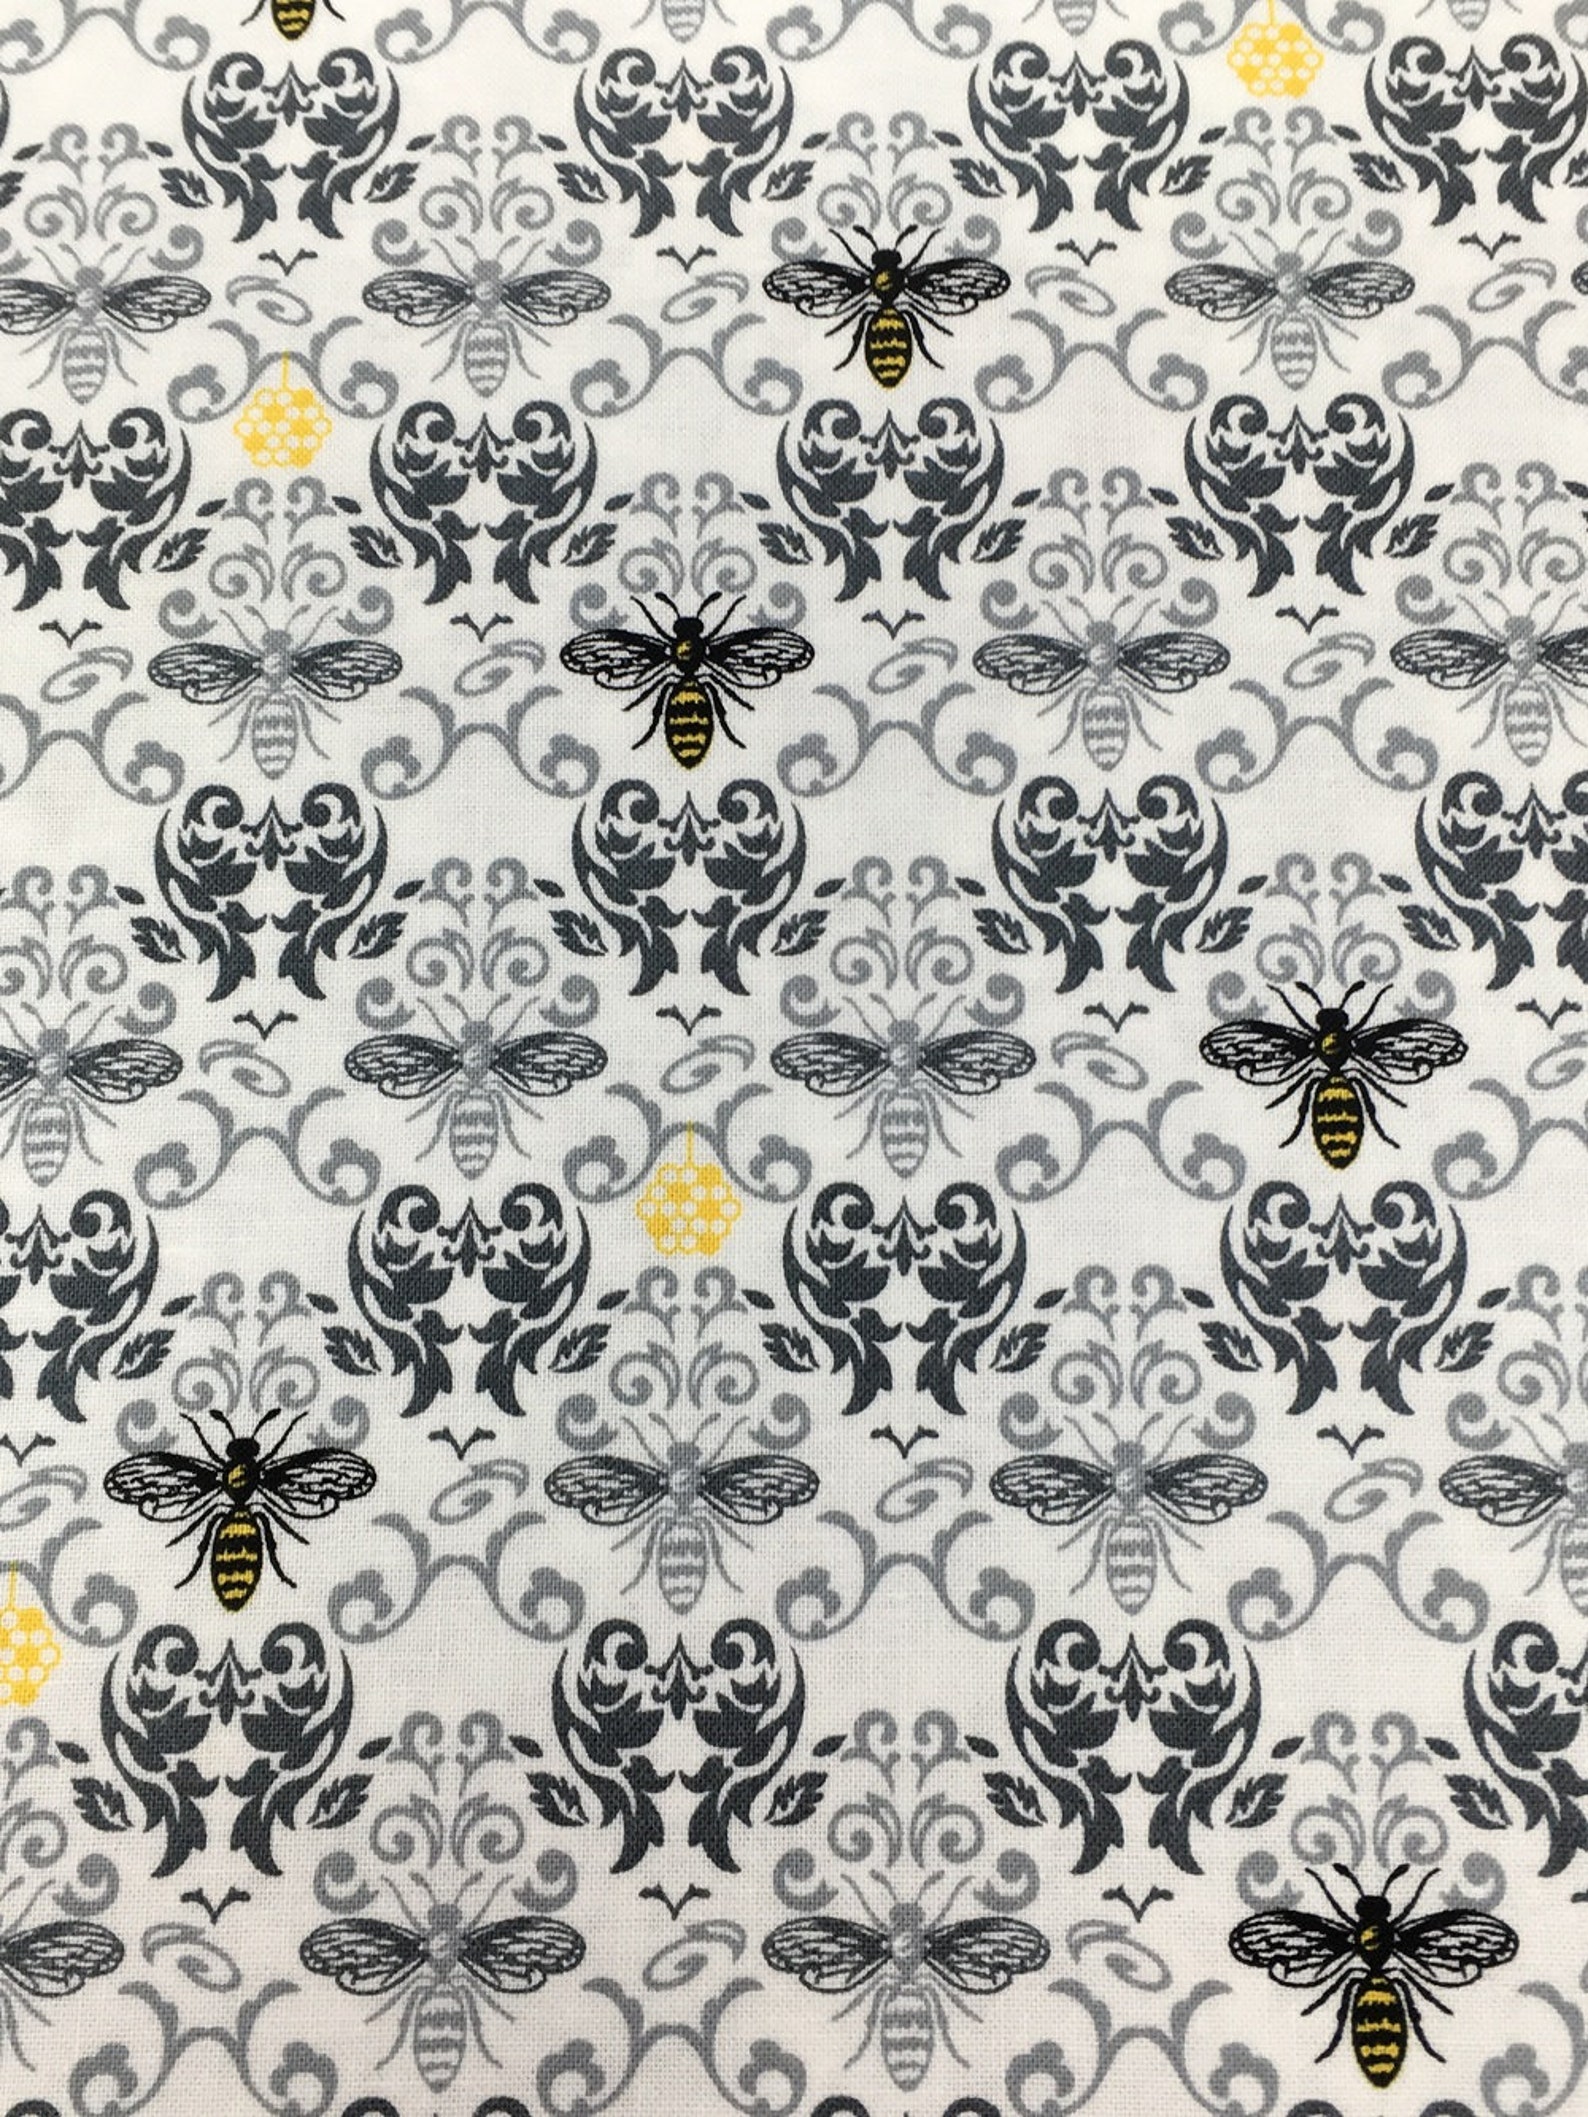 Bee Damask Fabric Black Damask And Bees Fabric By The Yard Etsy